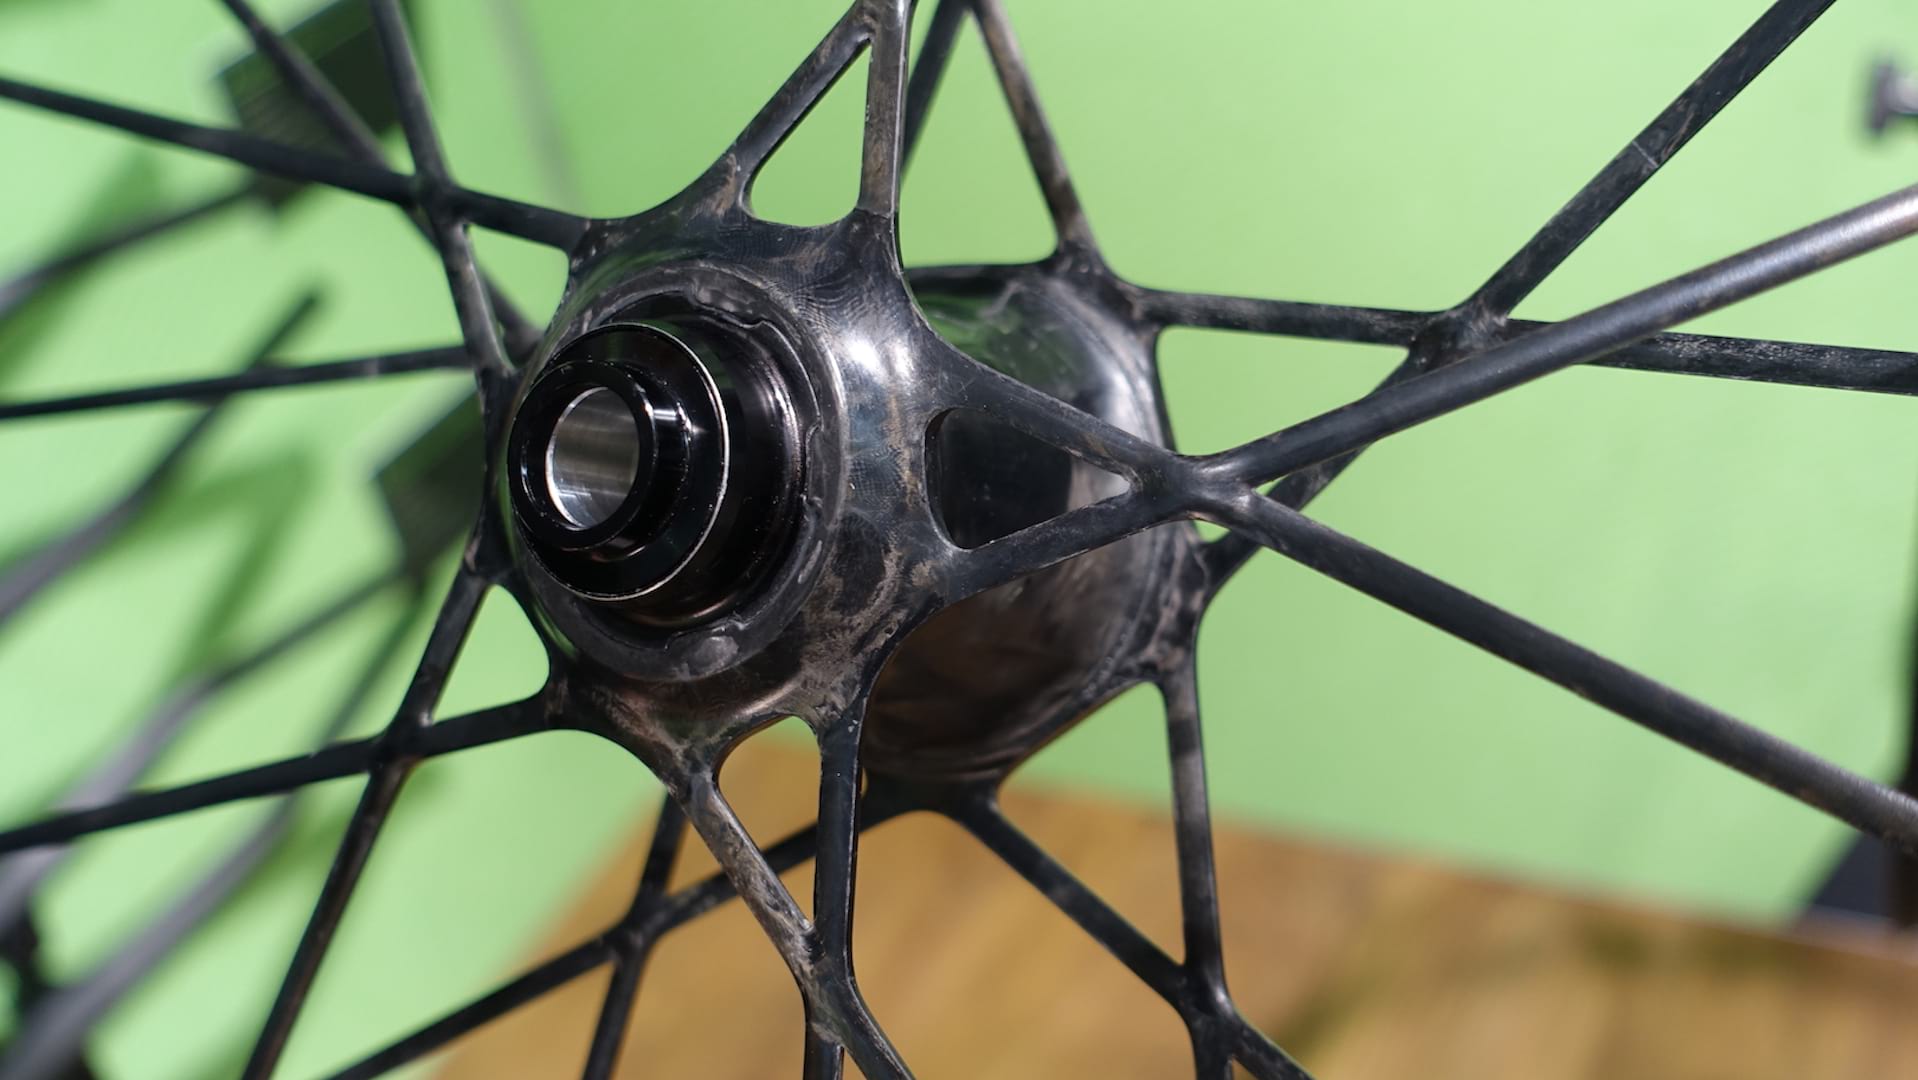 syncros capital 1.0 35 disc wheelset review